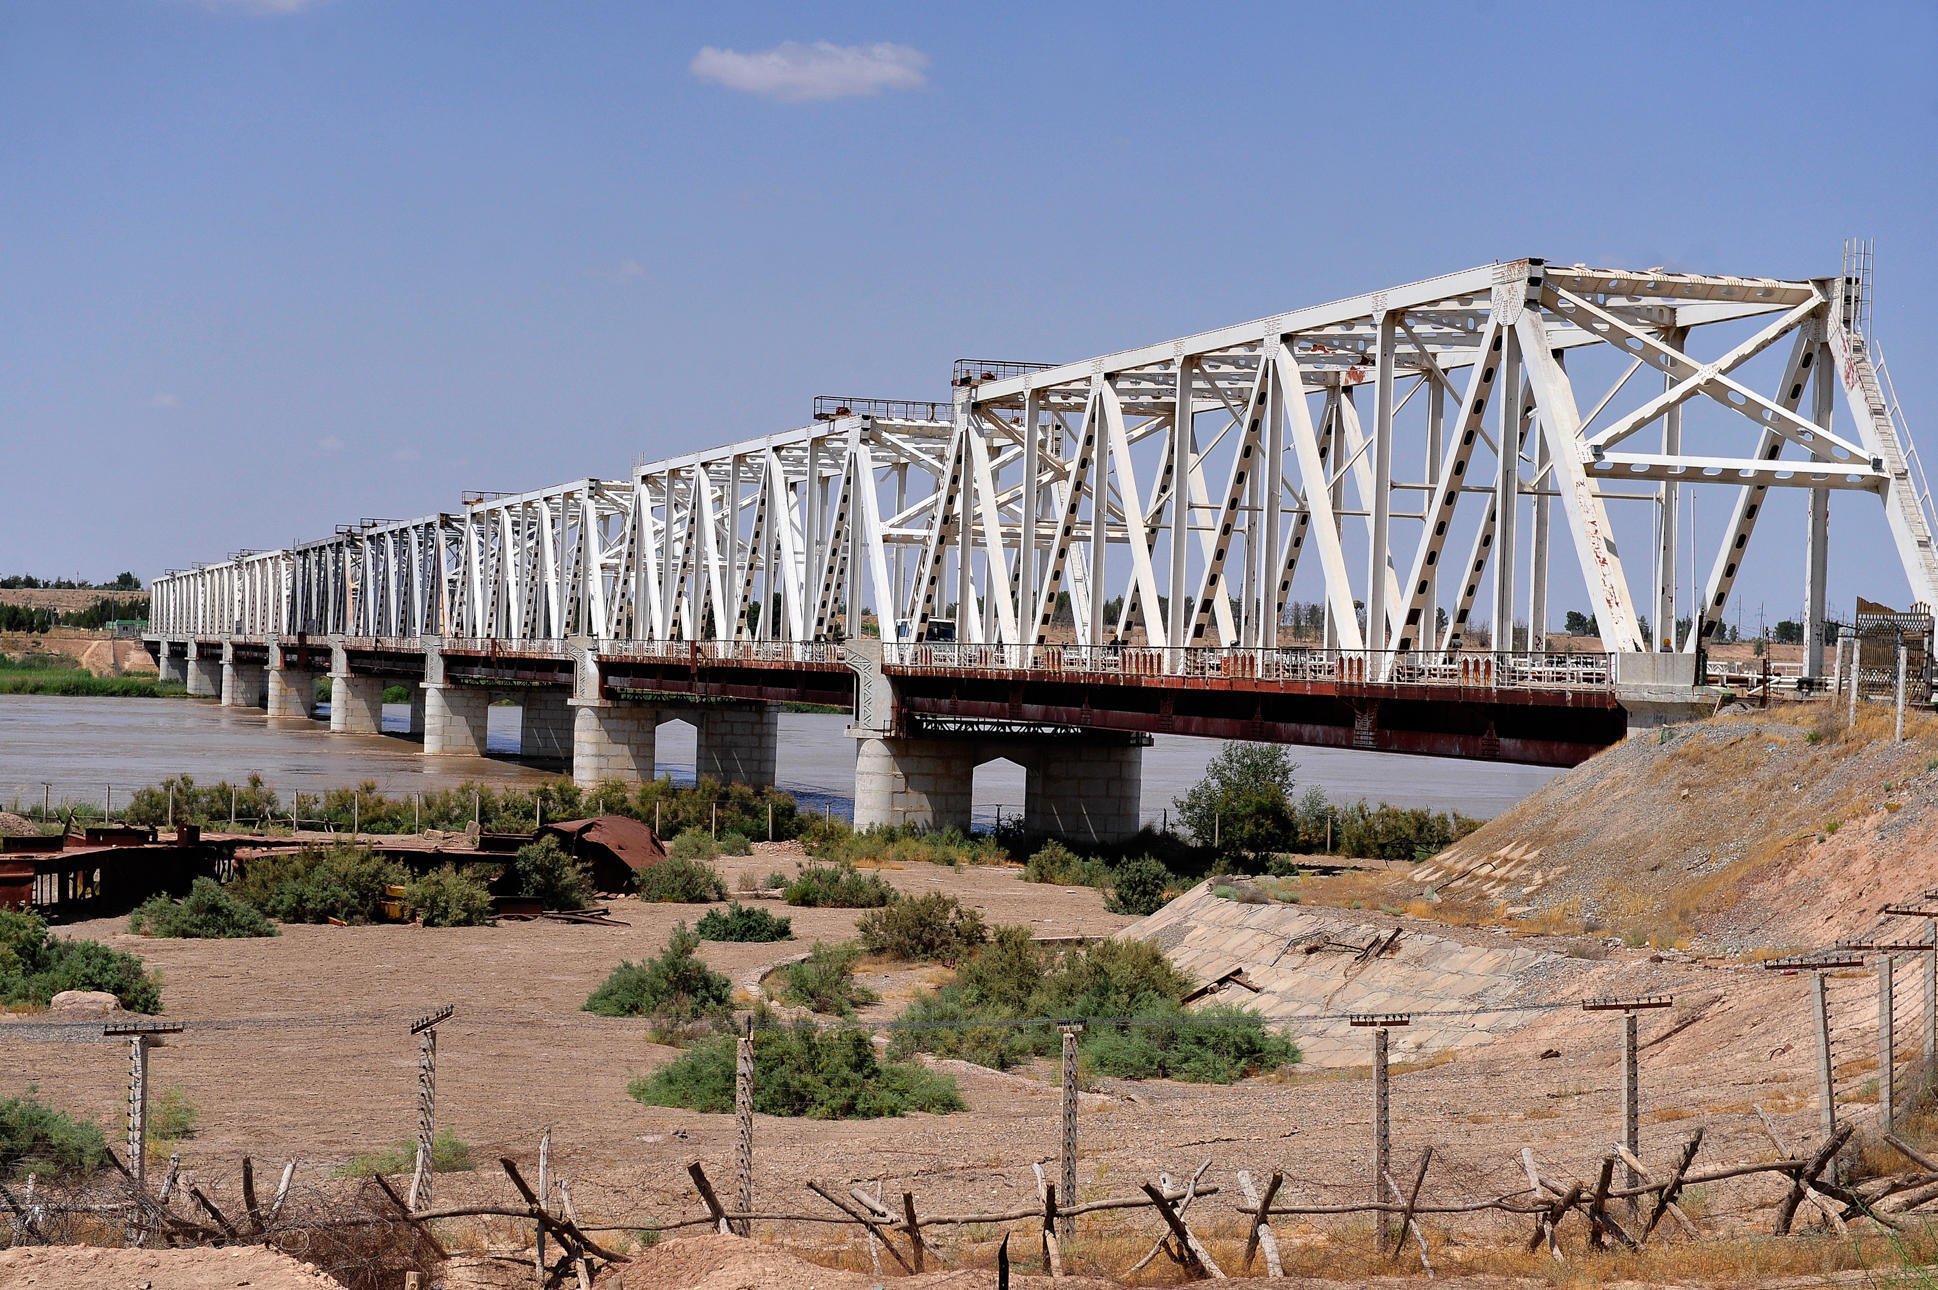 <p>The ‘Friendship Bridge’ that crosses the Amu Darya River is the only fixed connection between Uzbekistan and Afghanistan. It connects southeastern Uzbekistan with the province of Balkh in northern Afghanistan – where the Qosh Tepa canal is being built. (Image: PJF Military Collection / Alamy)</p>